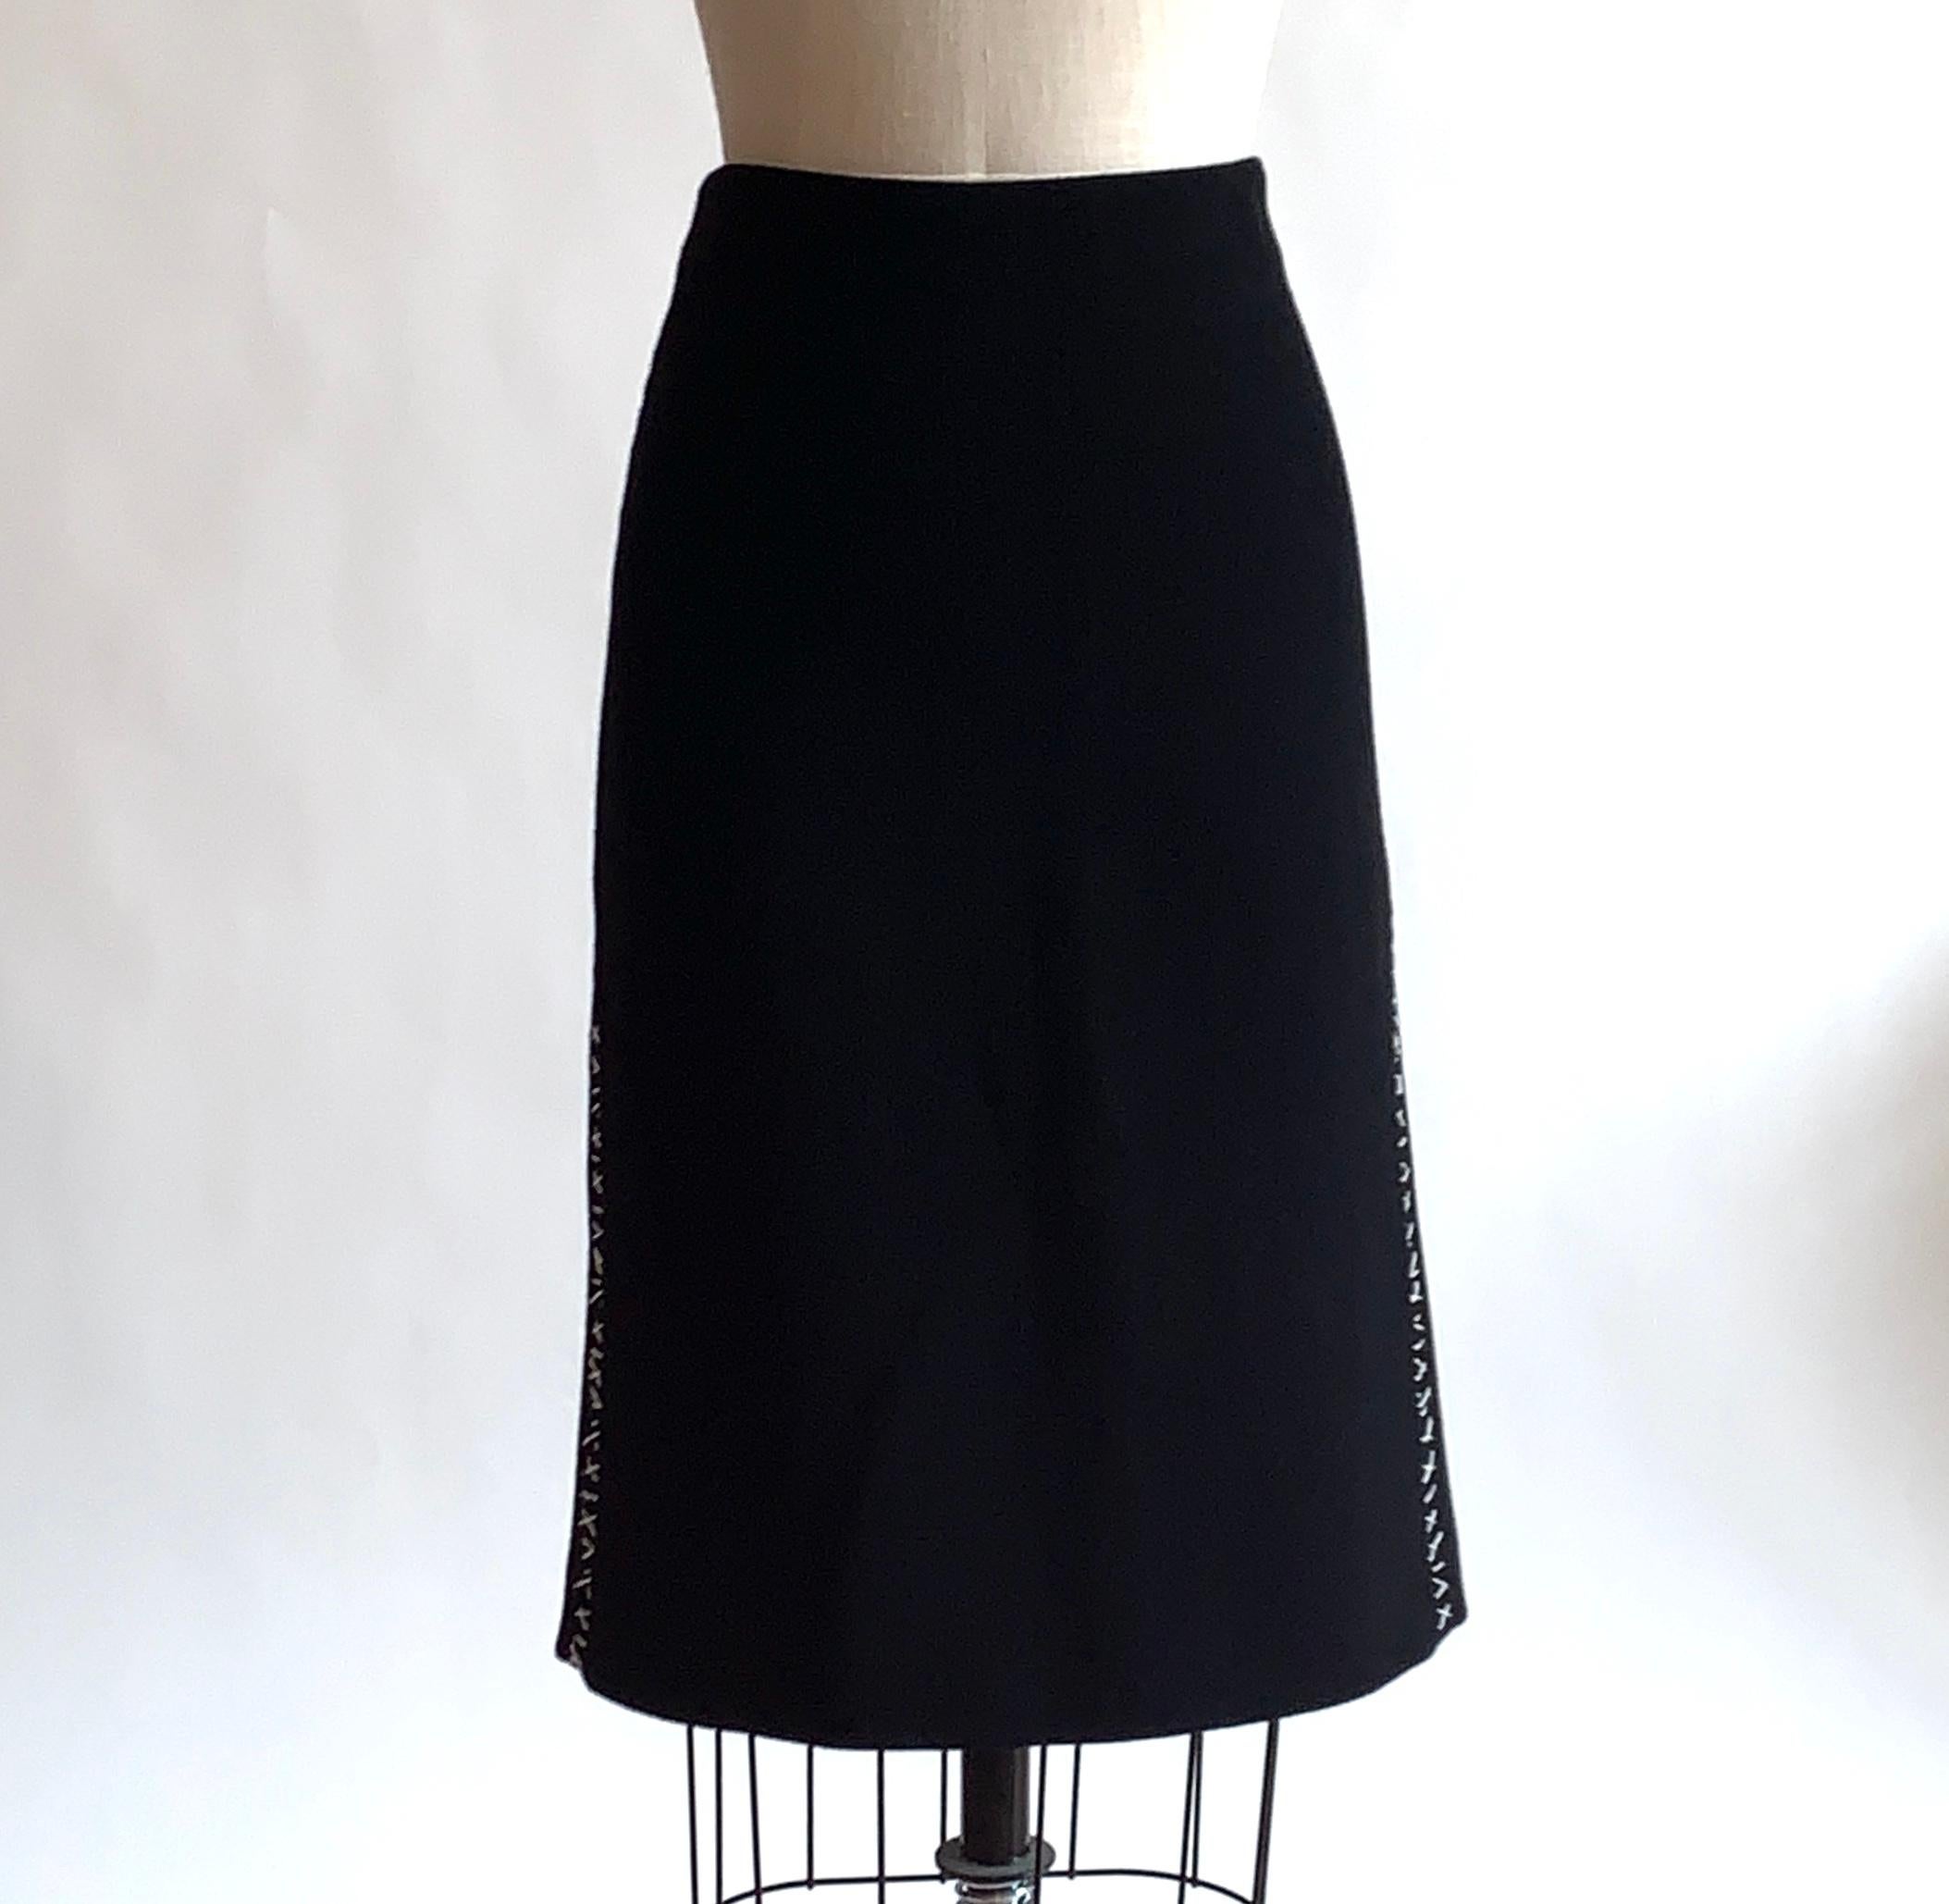 Alexander McQueen 2004 black pencil skirt with white accent stitches at back and sides.  Zip and hook and eye  at back waist, slit at back center. (Main photo is side view.)

100% wool.
Fully lined.

Made in Italy.

Size Italian 40, approximate US